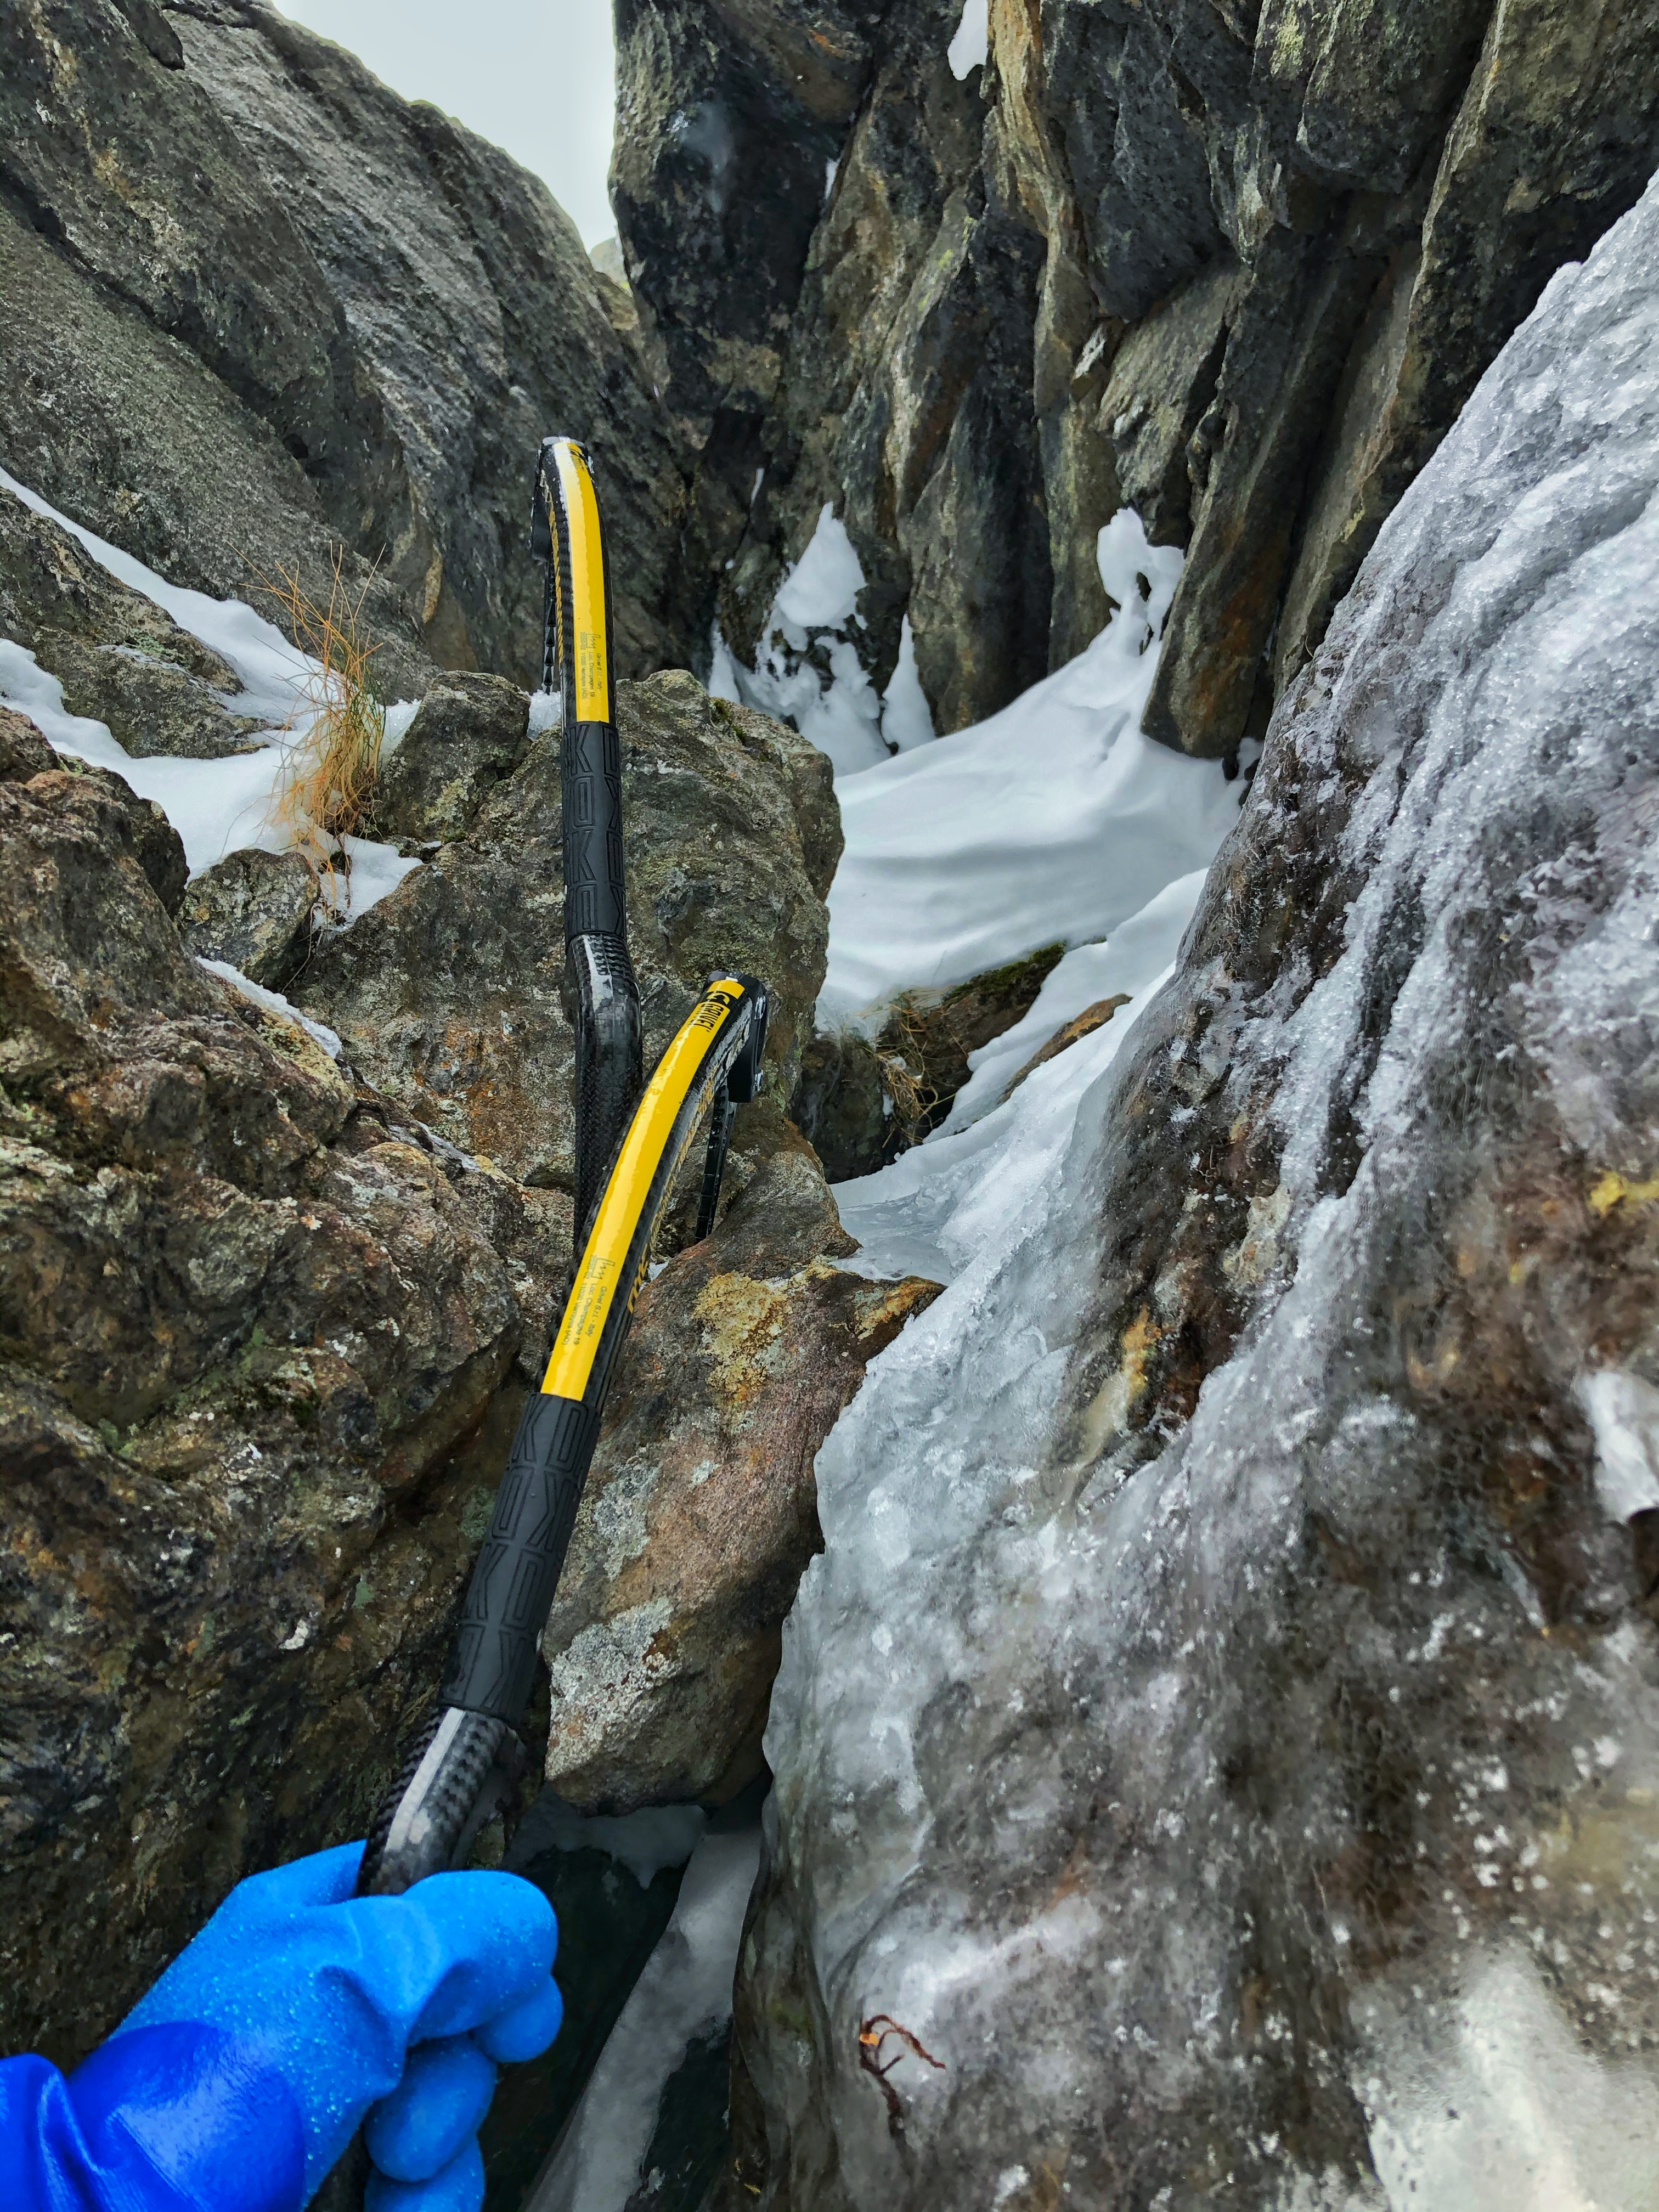 Come looking for Ice on Mt Washington